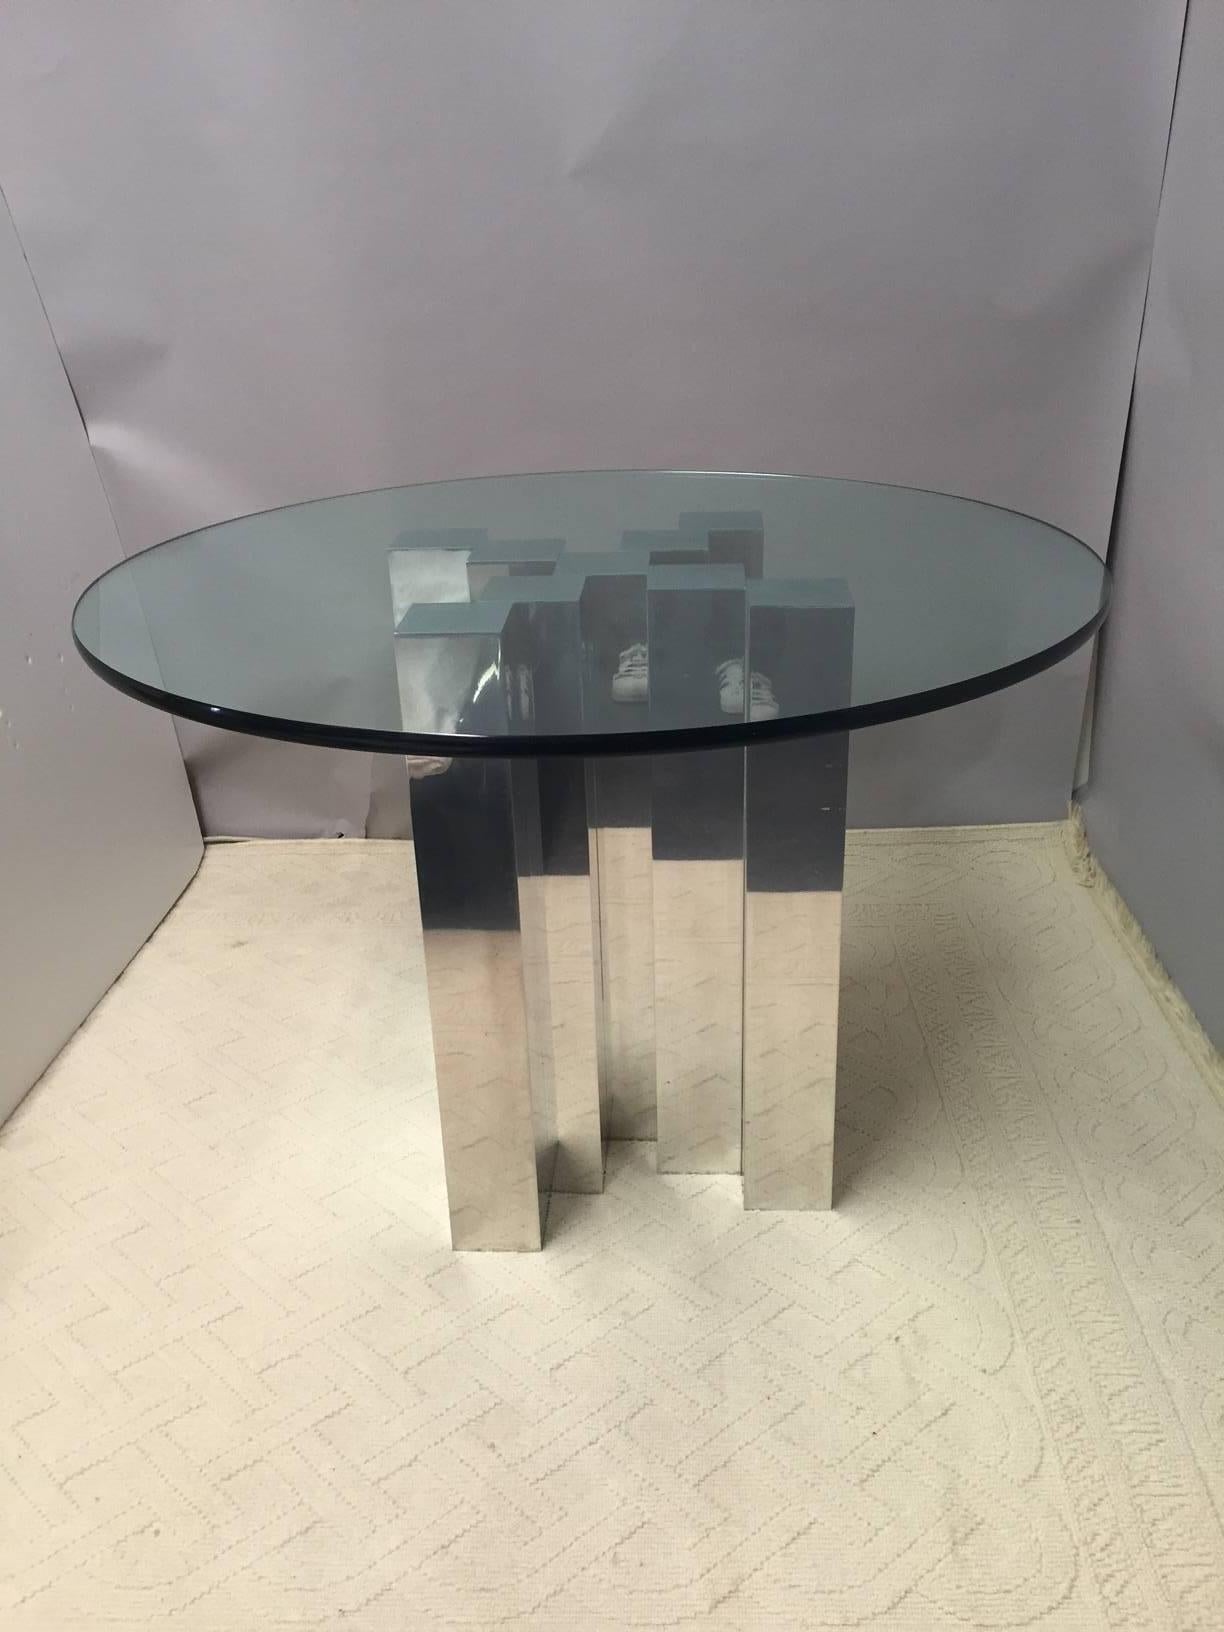 Sculptural geometric dining table in the manner of Paul Evans' Cityscape collection for Directional Furniture. Designed by Paul Mayen for Habitat, circa 1970s. Constructed of 4